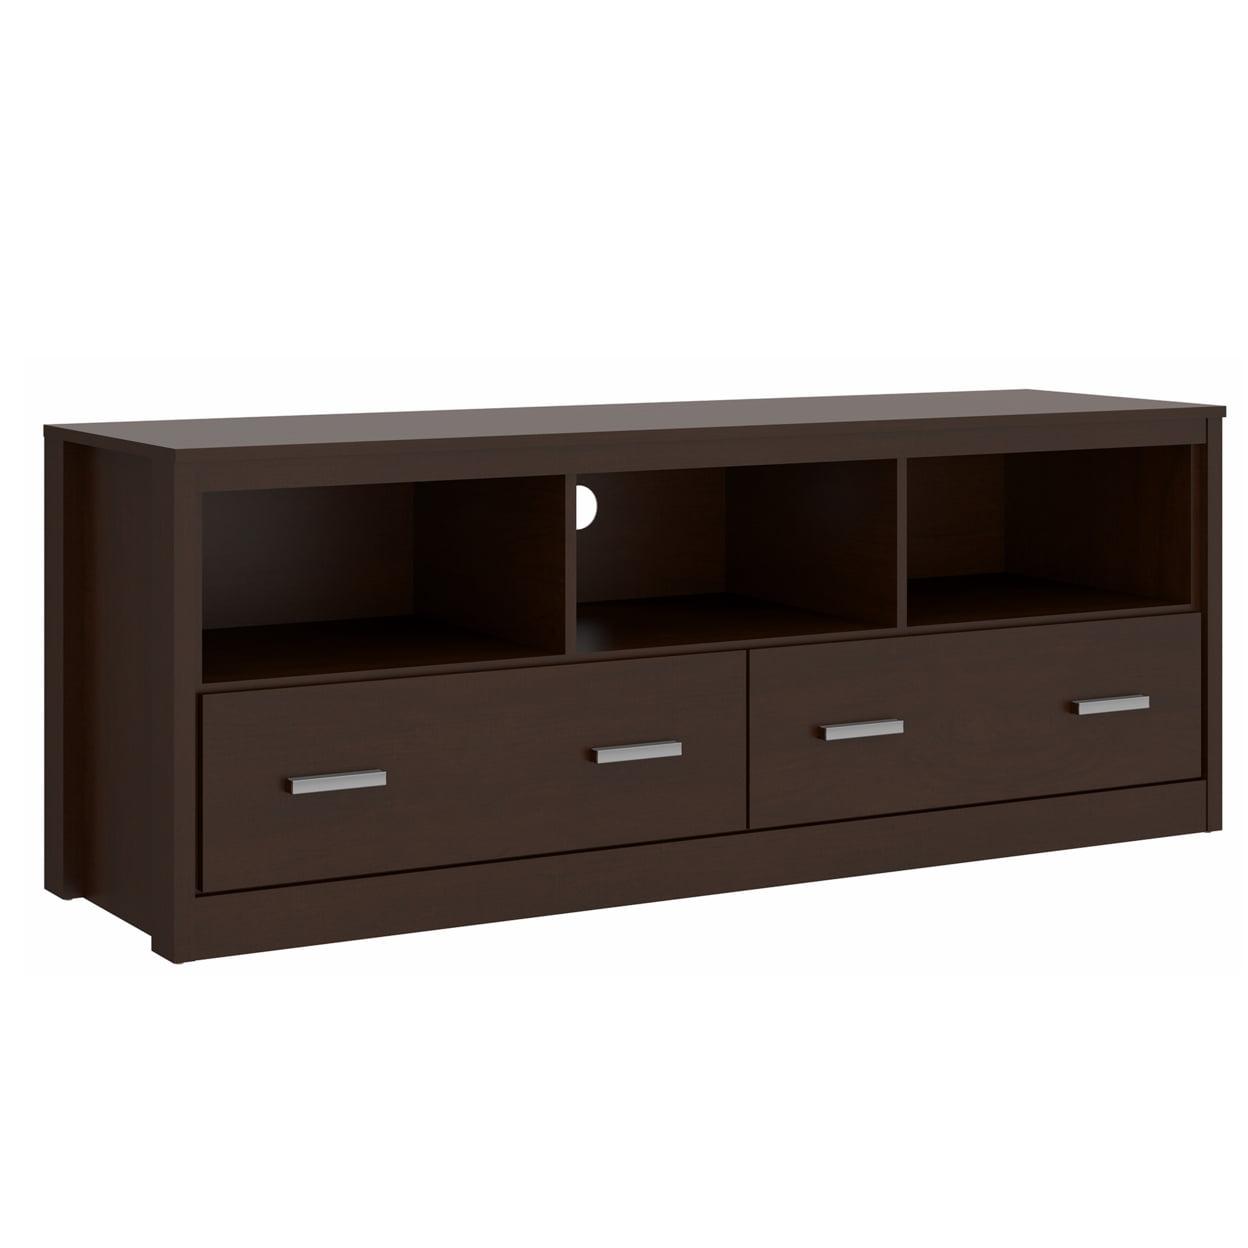 Tobacco Brown Wooden TV Stand with Cabinet Storage and Cable Management, 59"